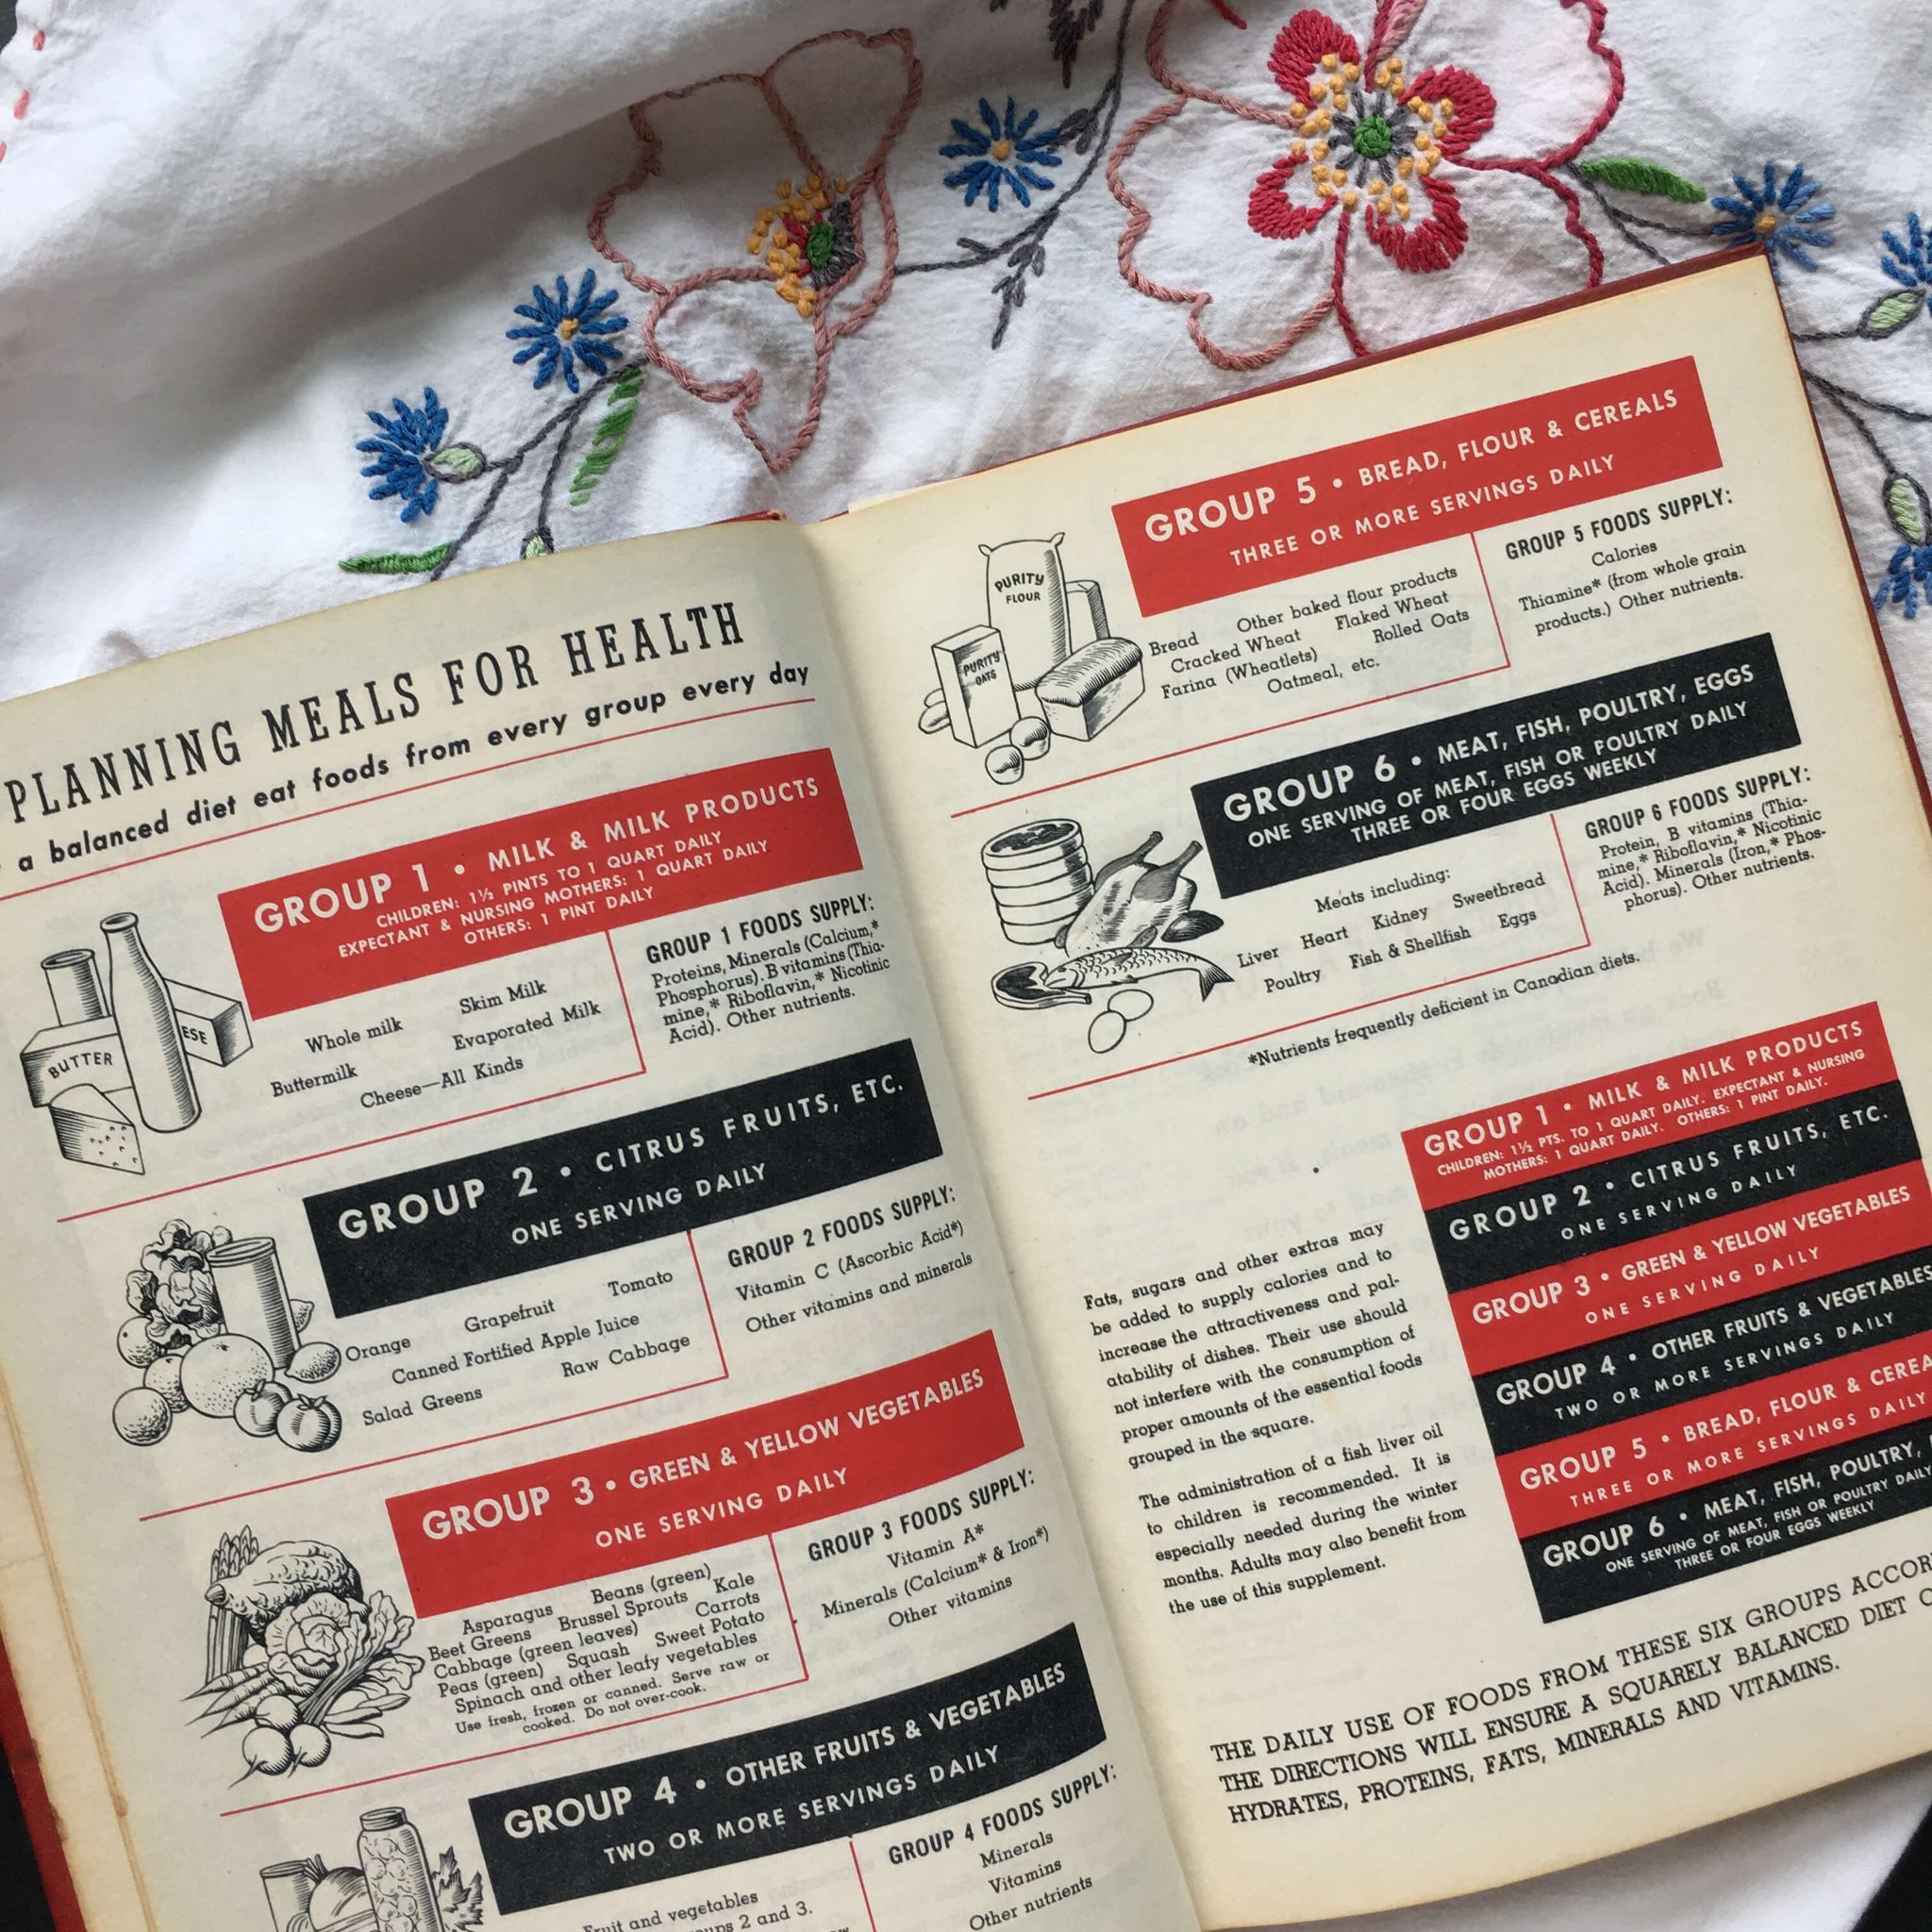 The Purity Cookbook - Purity Flour Mills Canada - 1945 Wartime Edition - WWII Era Cookbooks